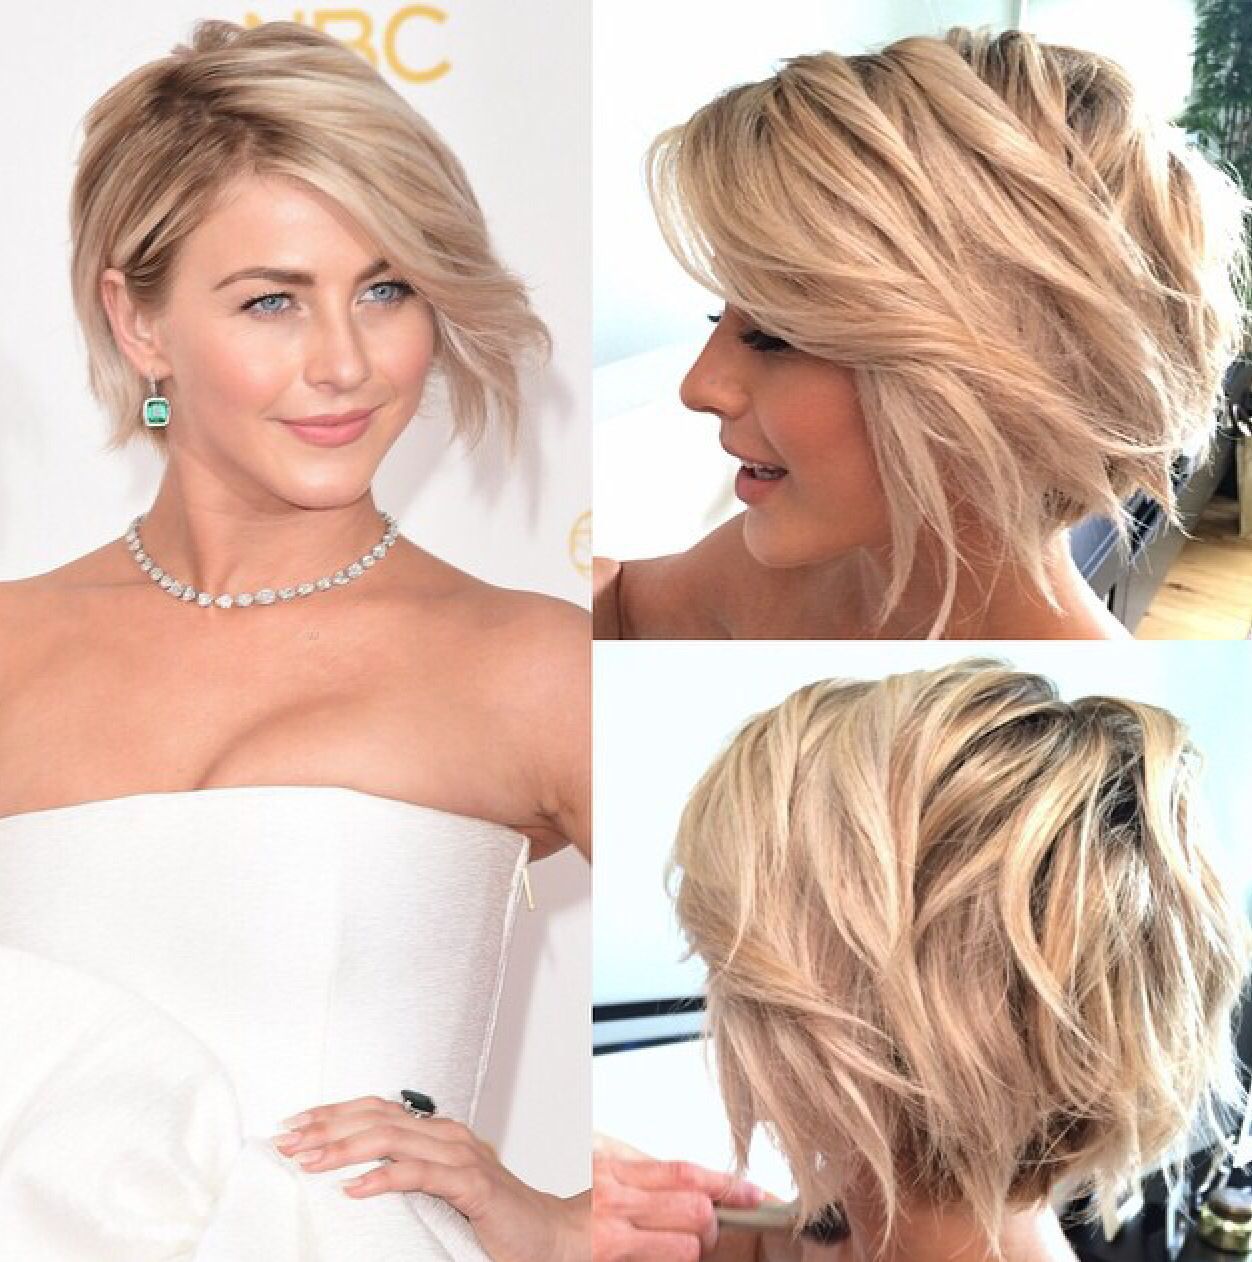 Julianne Hough at the Emmys by hairstylist Riawna Capri!